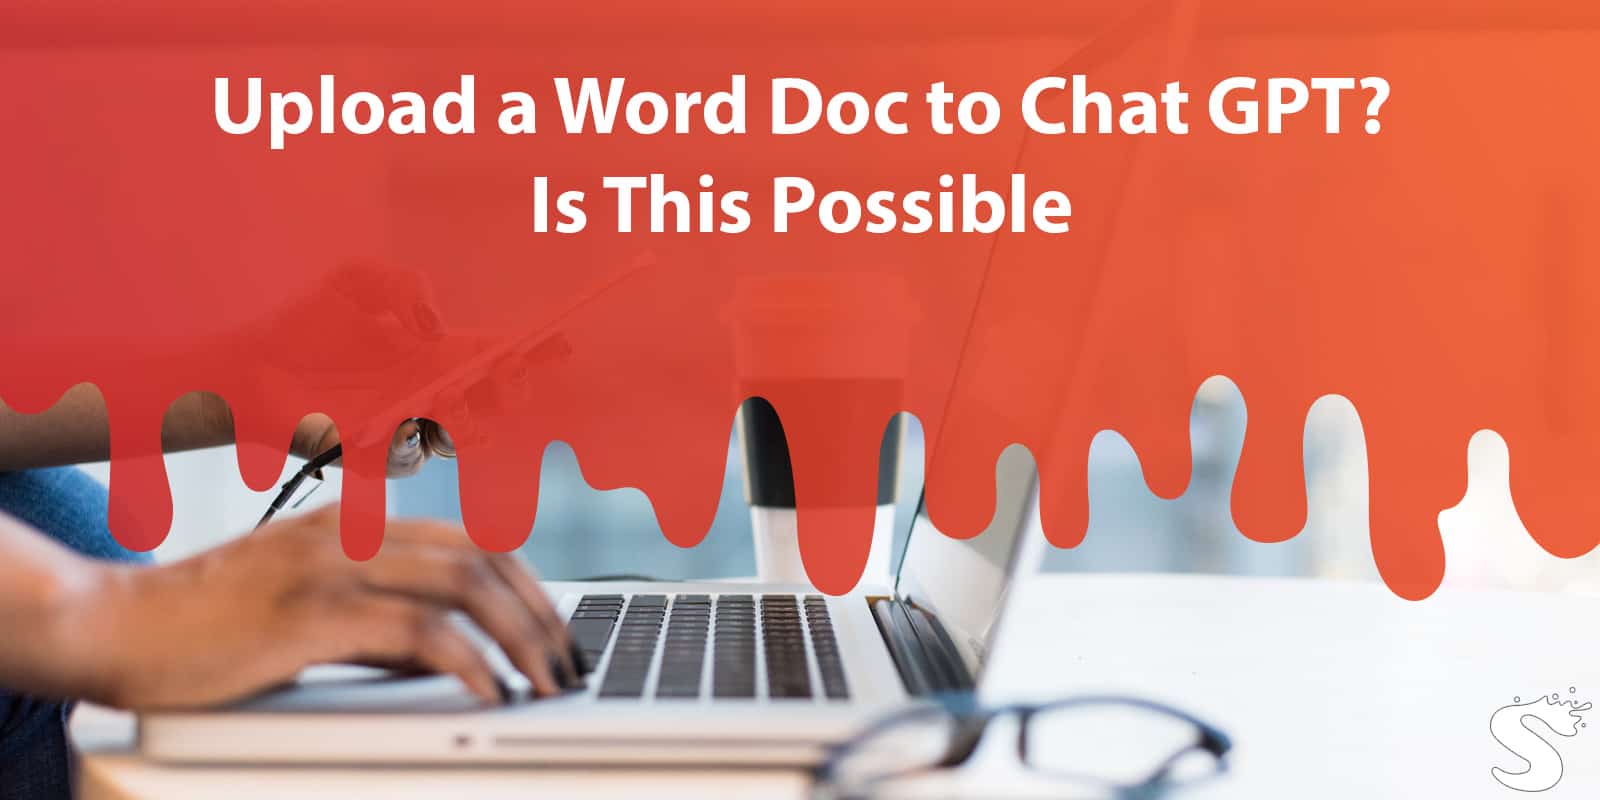 Upload a Word Doc to Chat GPT